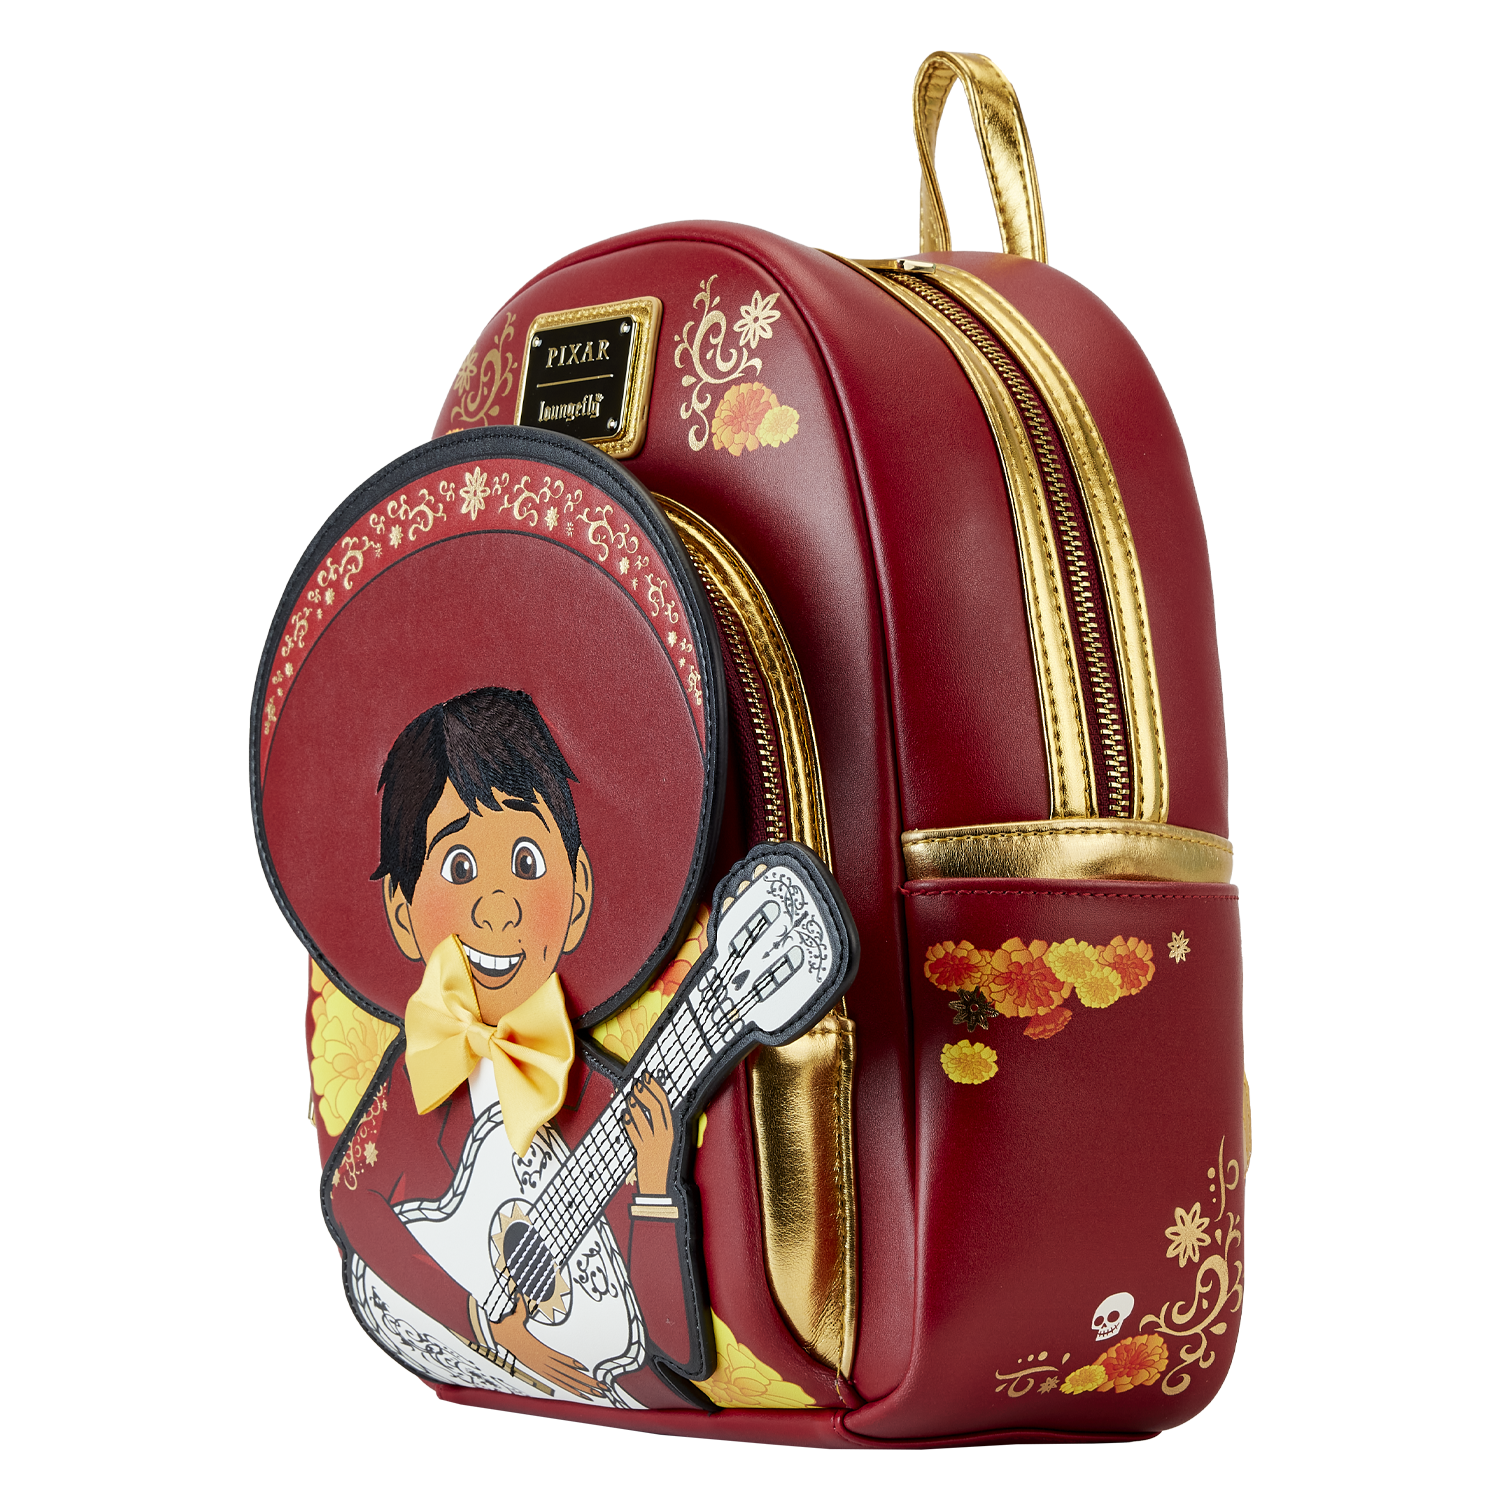 Buy A Goofy Movie Road Trip Mini Backpack at Loungefly.